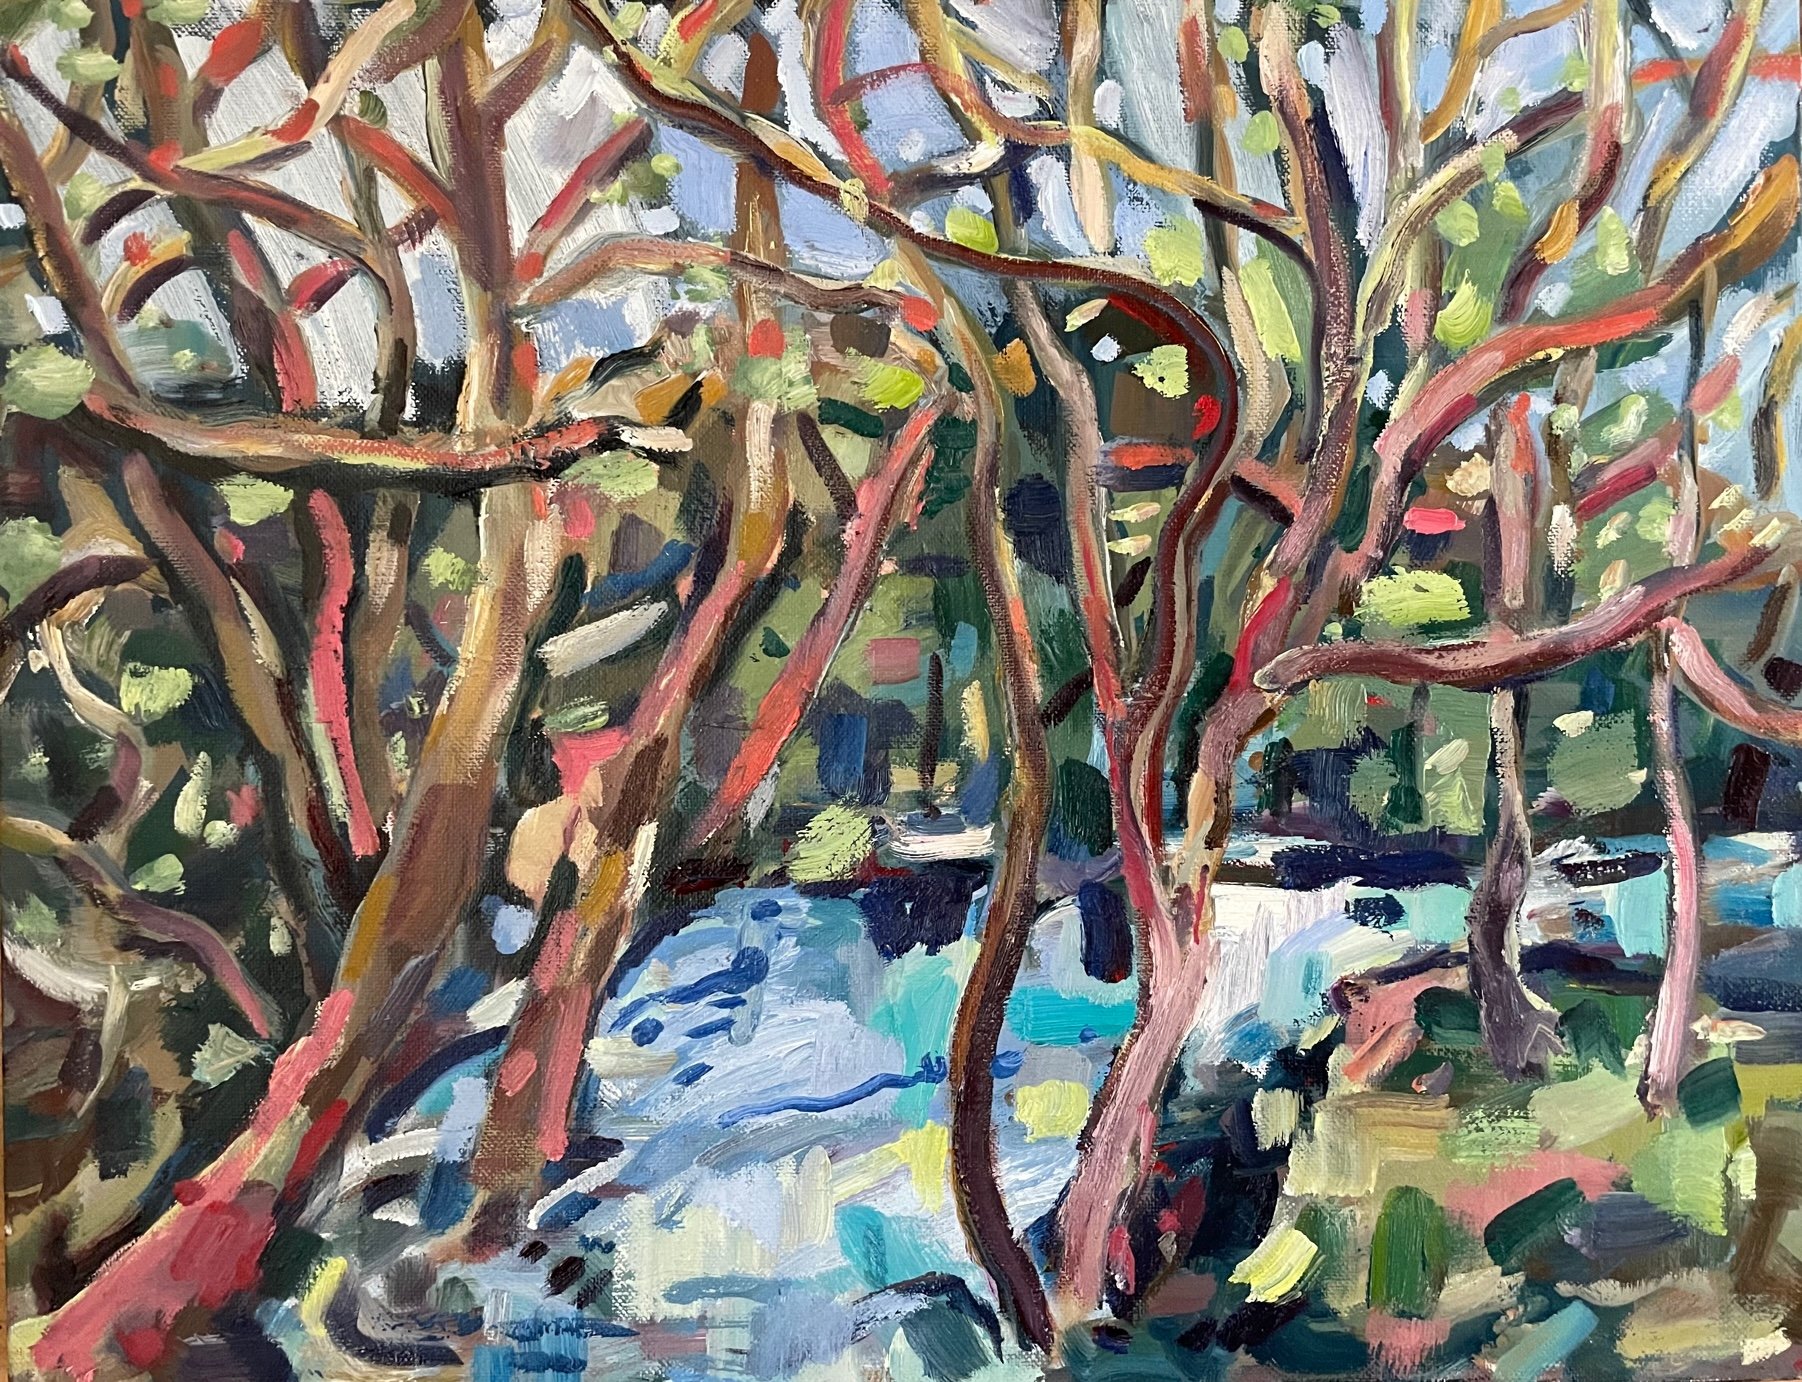 River bend, oil on canvas, 40x50cm, unframed, £595